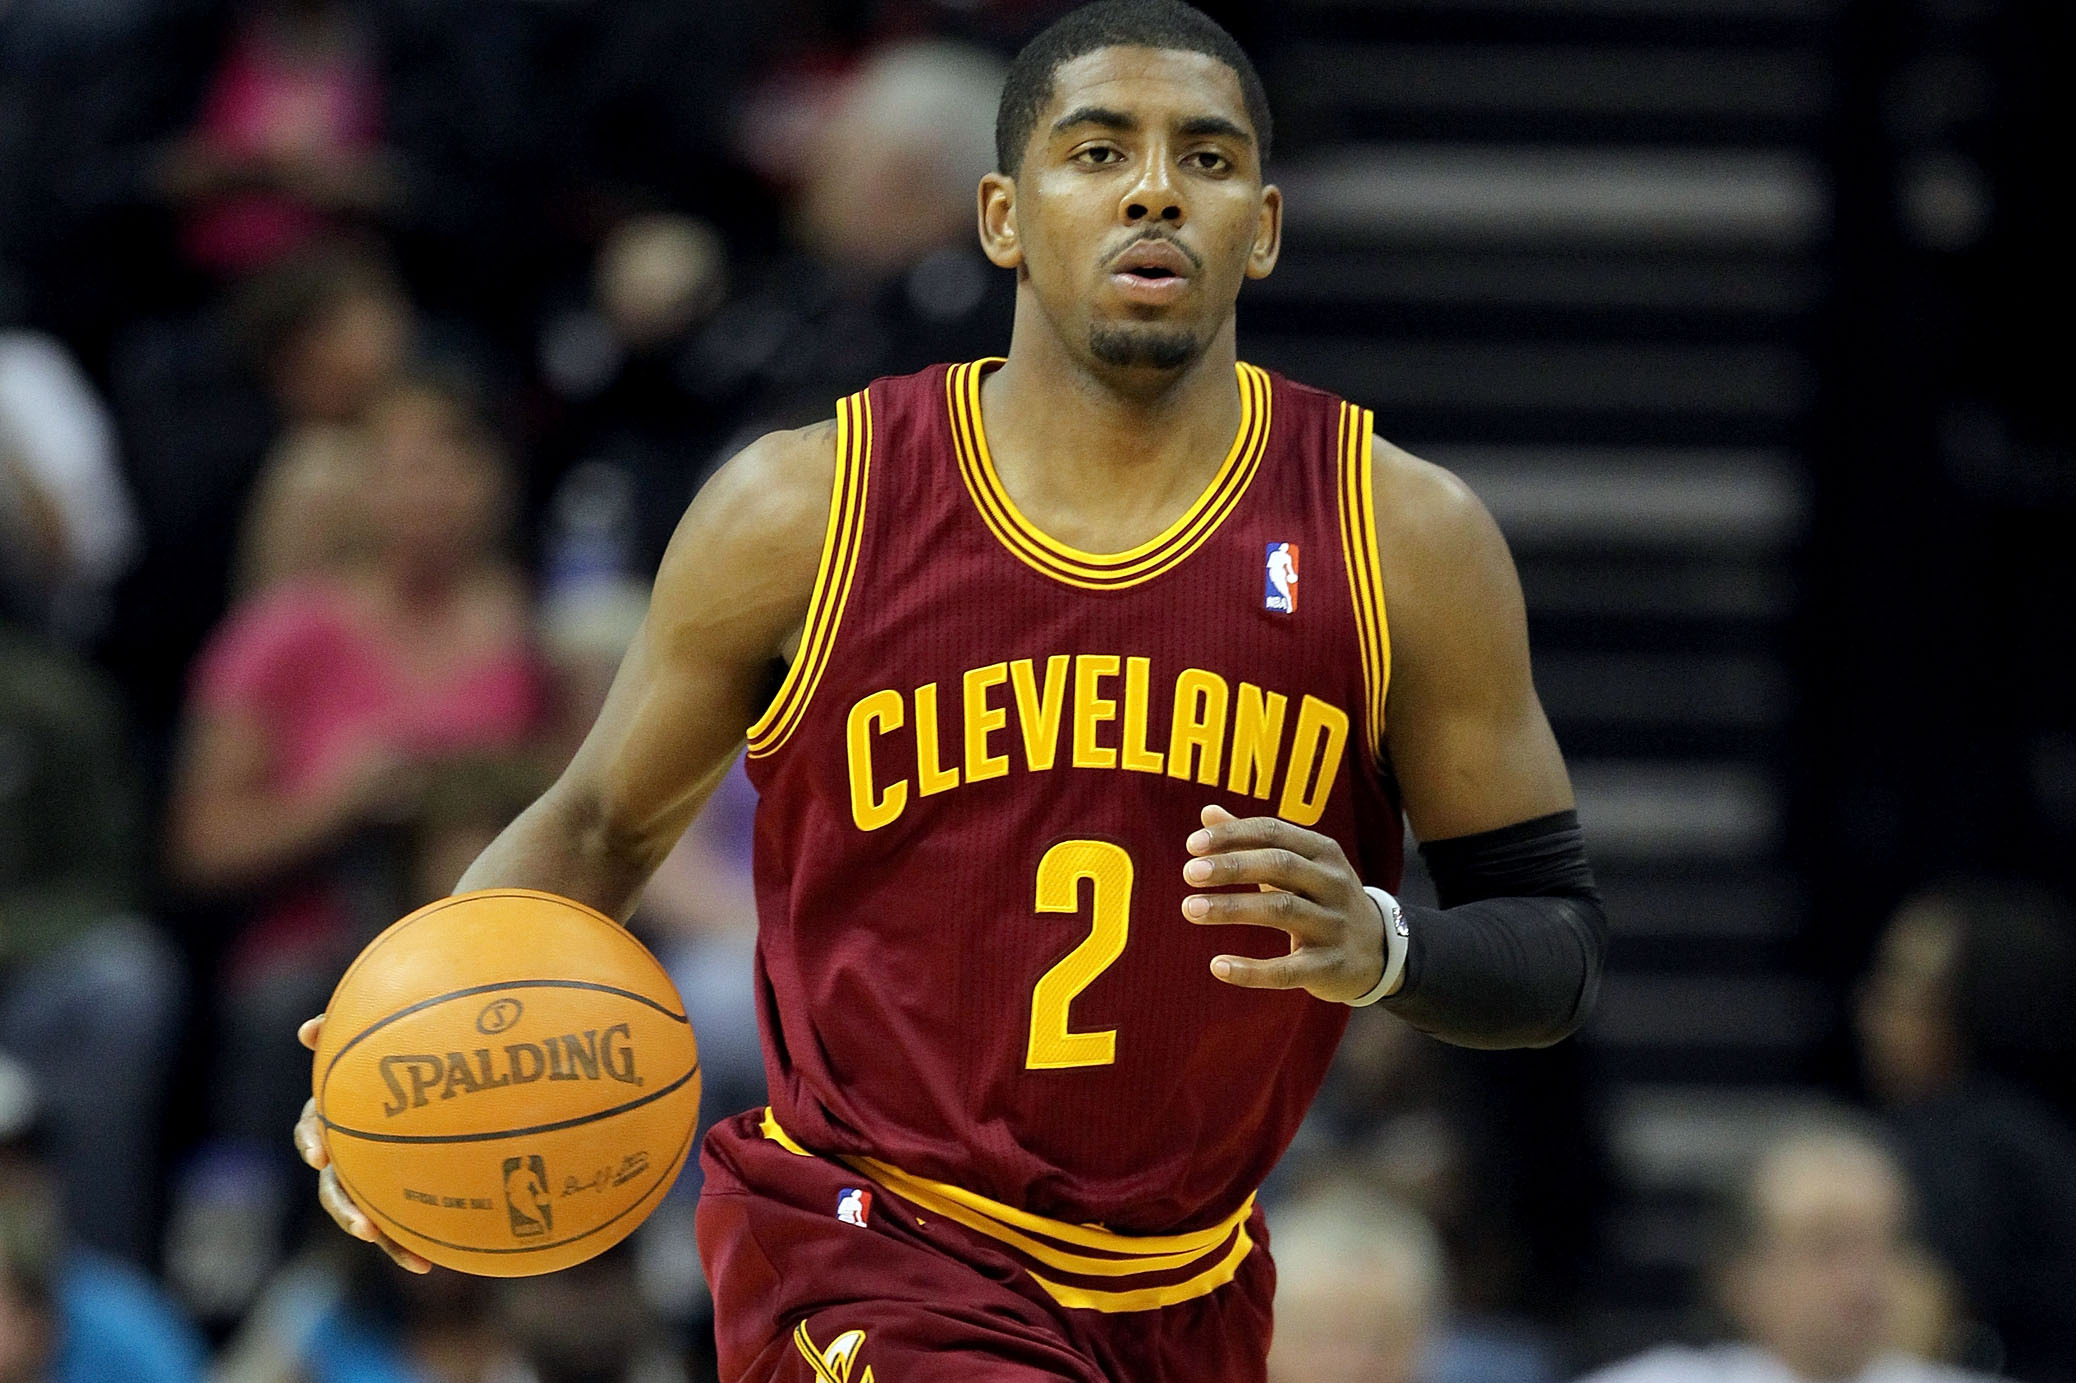 Kyrie Irving wins the NBA's Rookie of the Year award